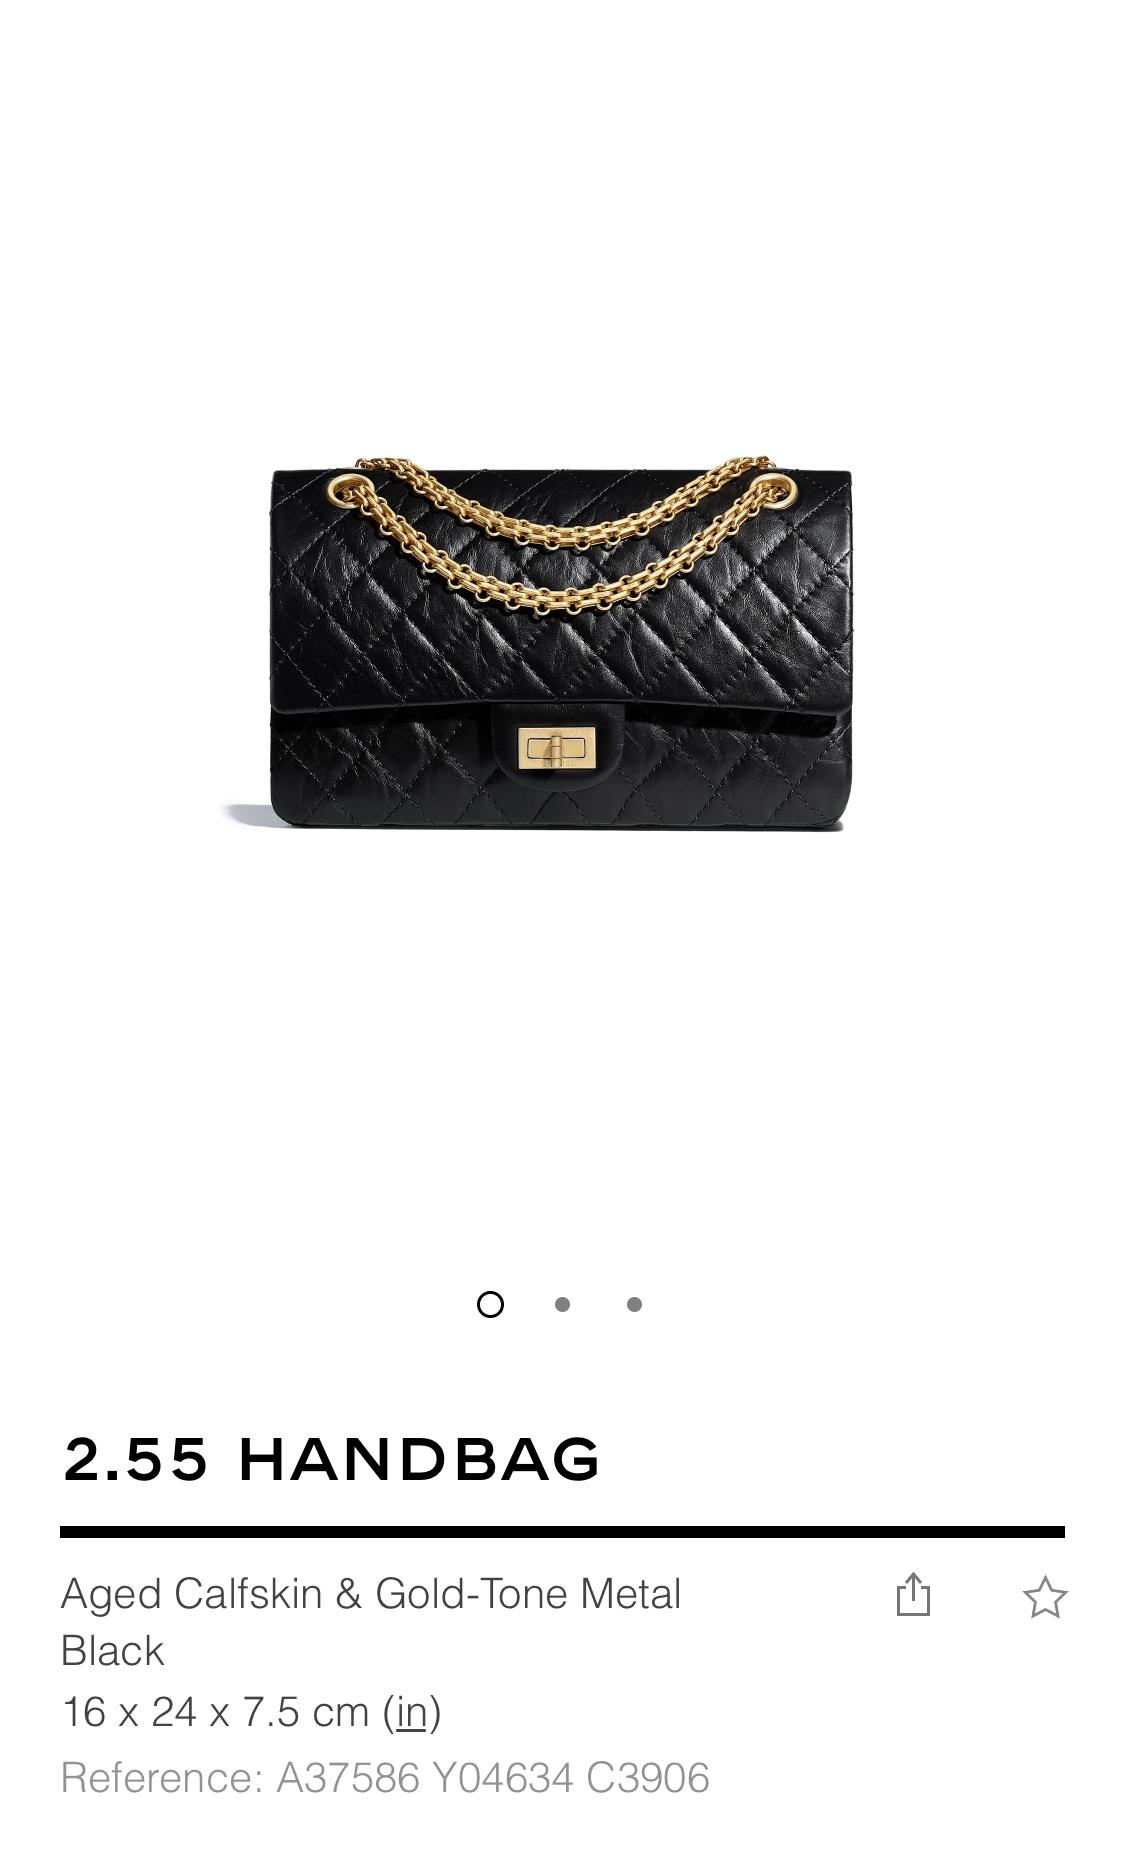 CHANEL Increases Its Bag Prices Again  Heres the New Price List  NYLON  SINGAPORE